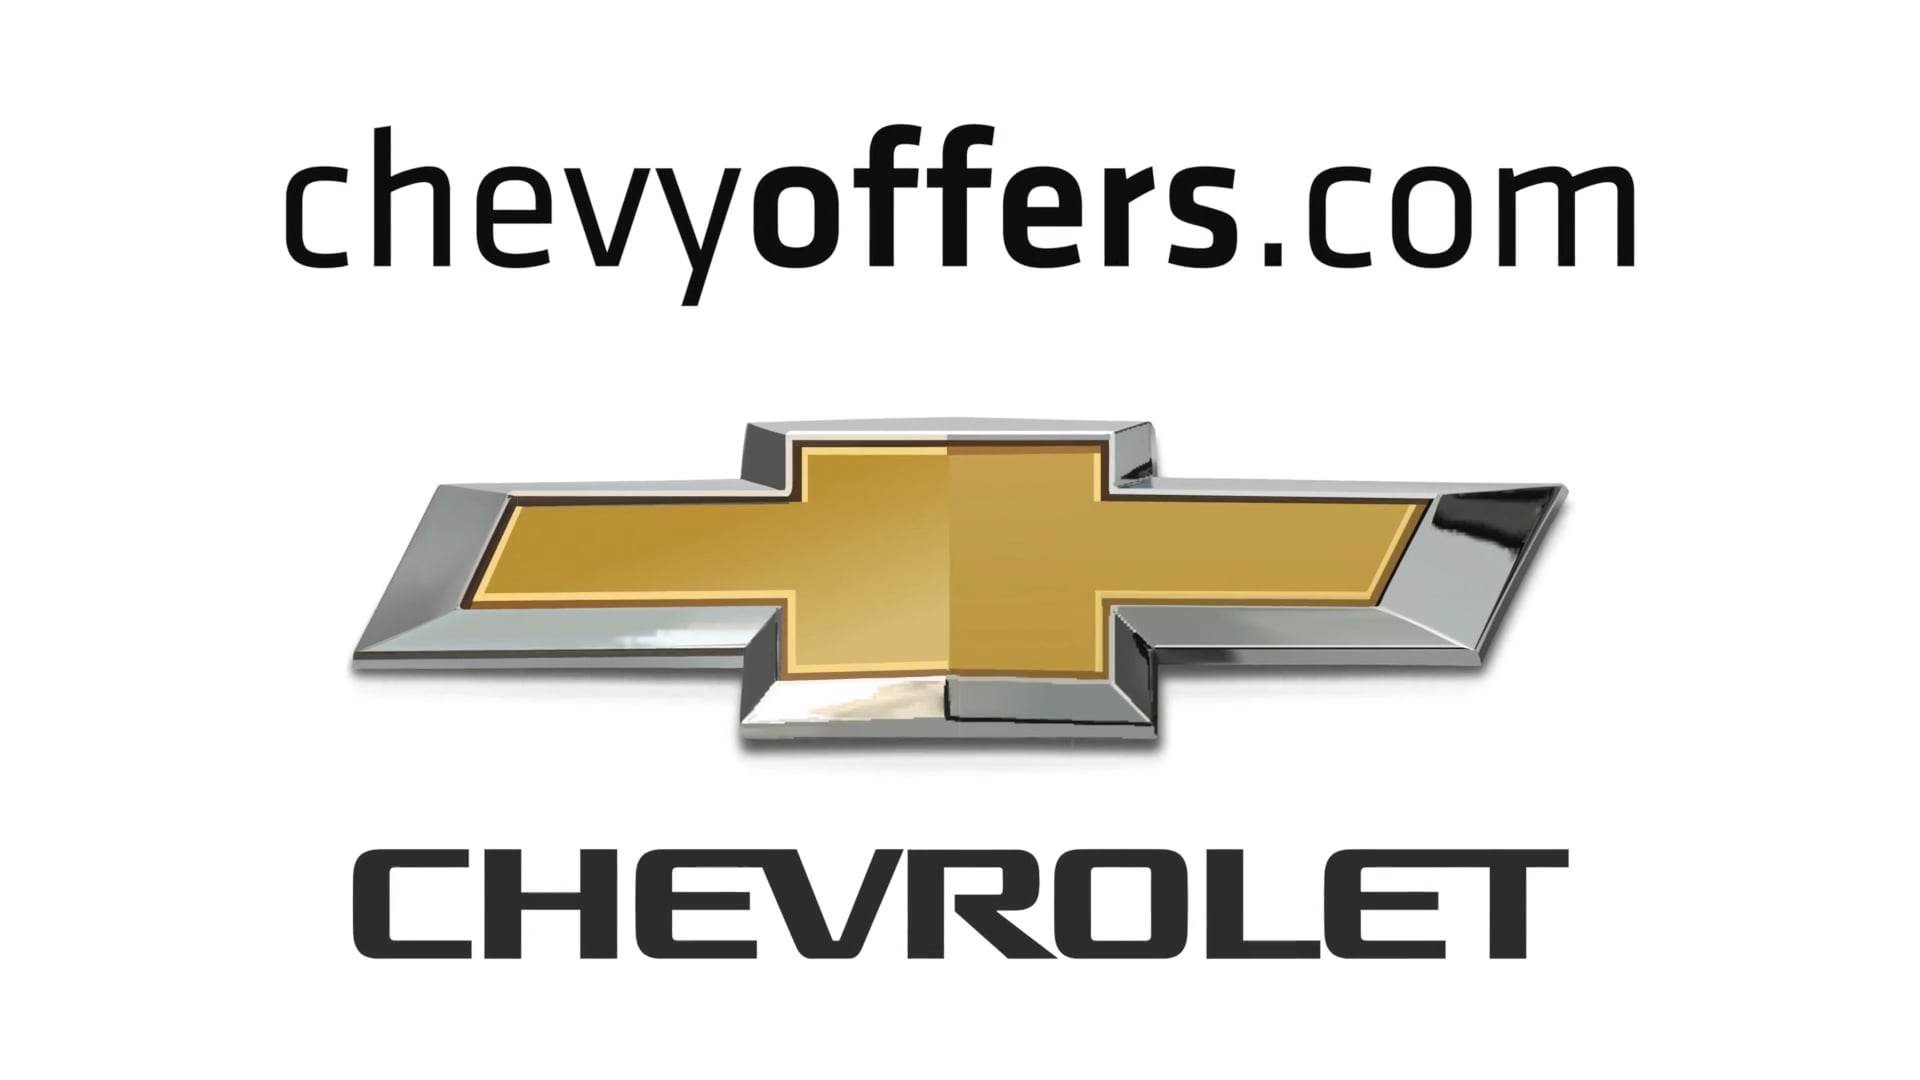 Chevy Offers Brand Spot